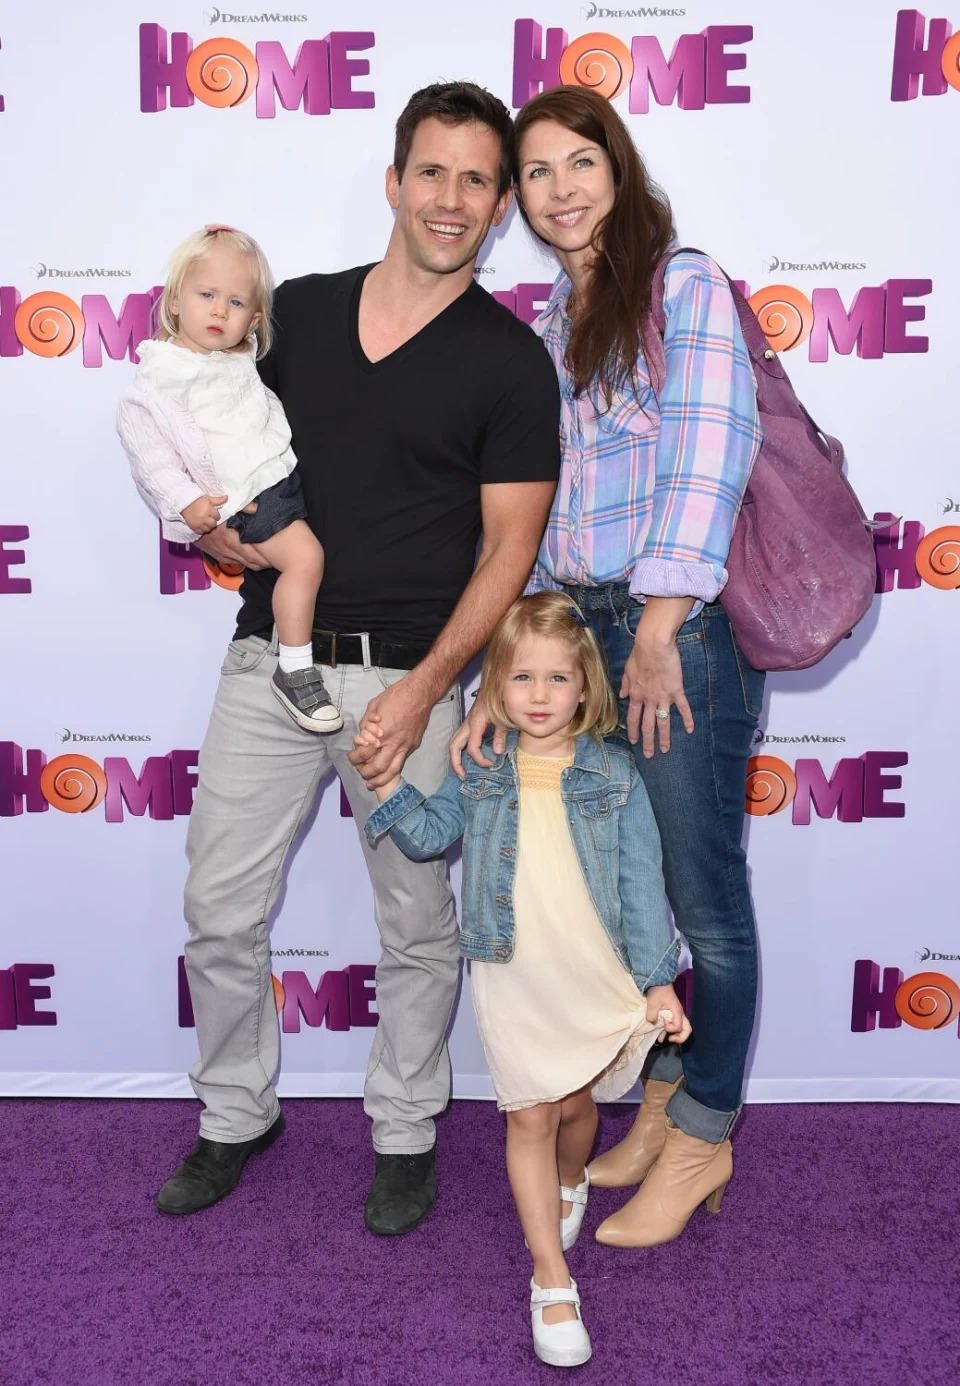 A man and a woman in casual wear holding two young girls posing for pictures on a purple carpet